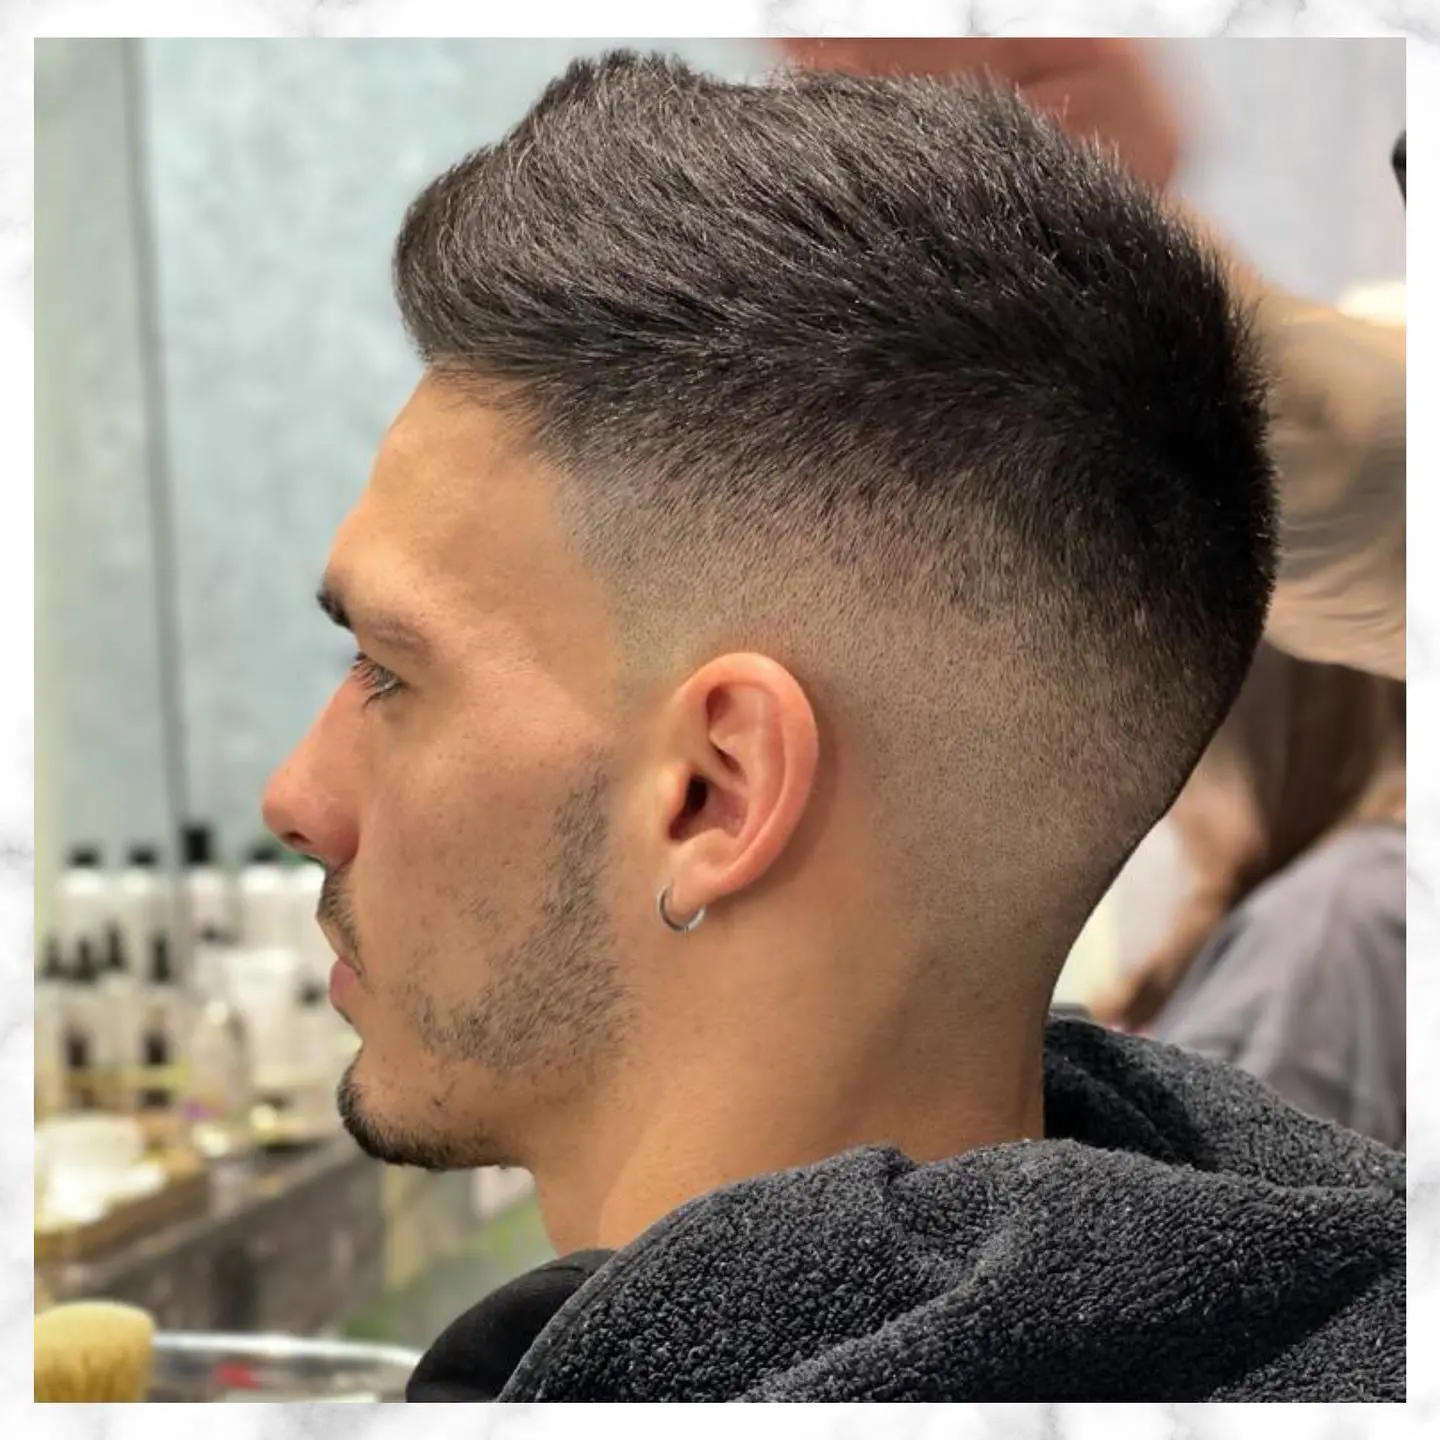 50 Mid Fade Haircut Ideas for Men in 2022 with Images